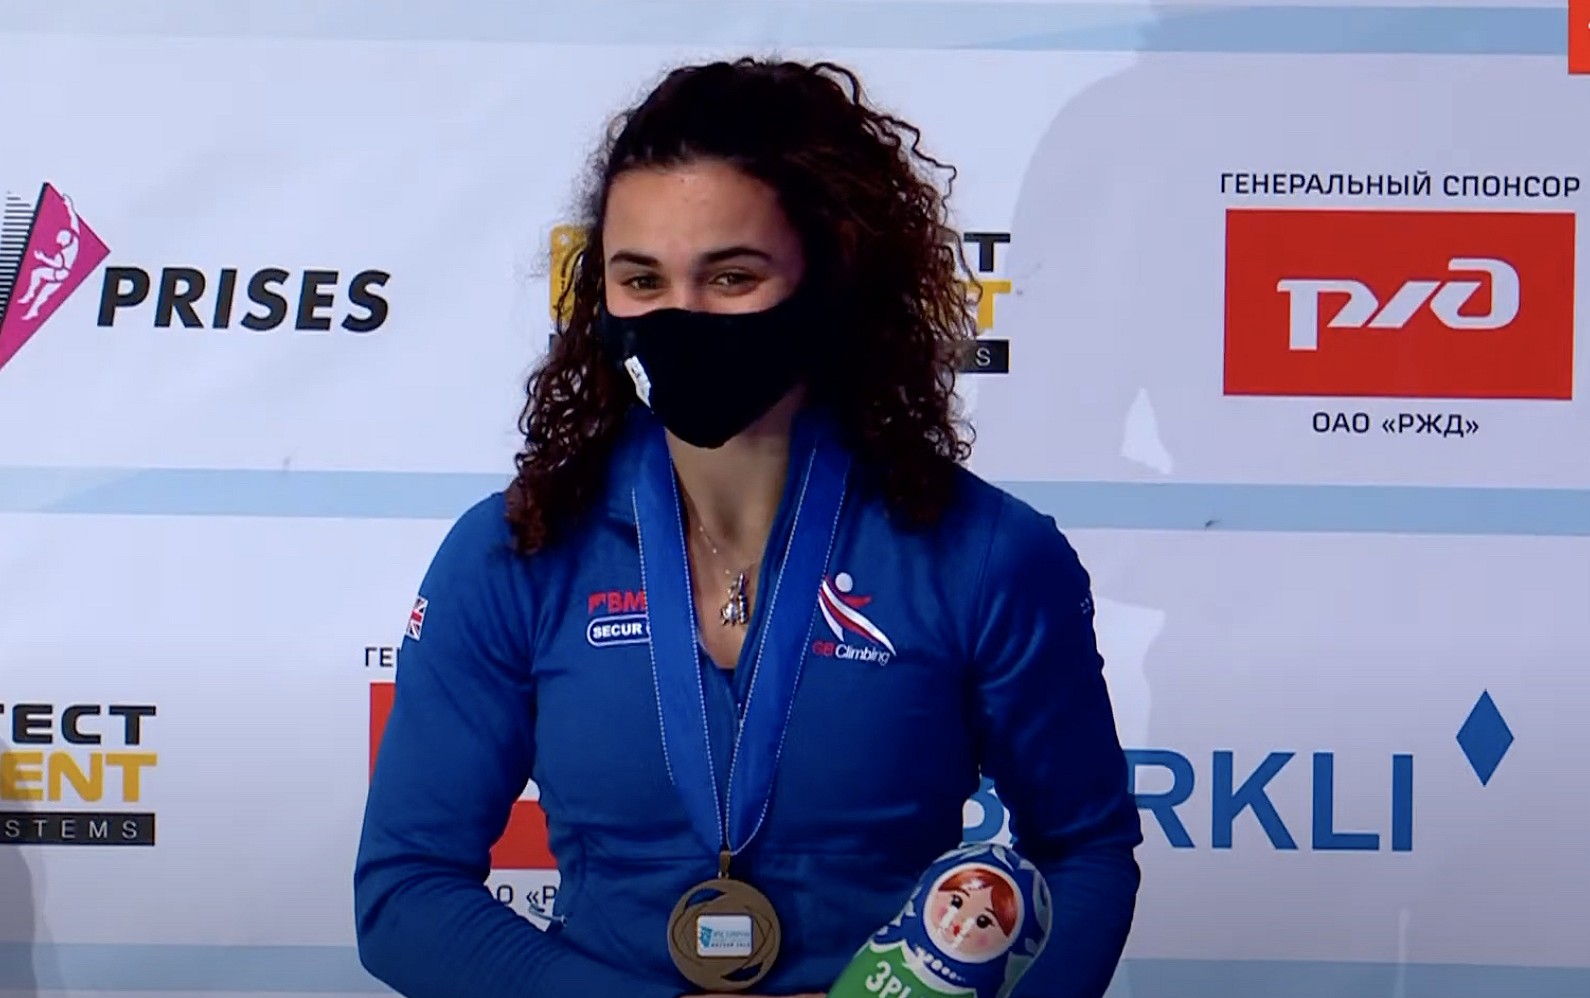 Molly Thompson-Smith placed 3rd in the Lead event in Moscow.  © IFSC